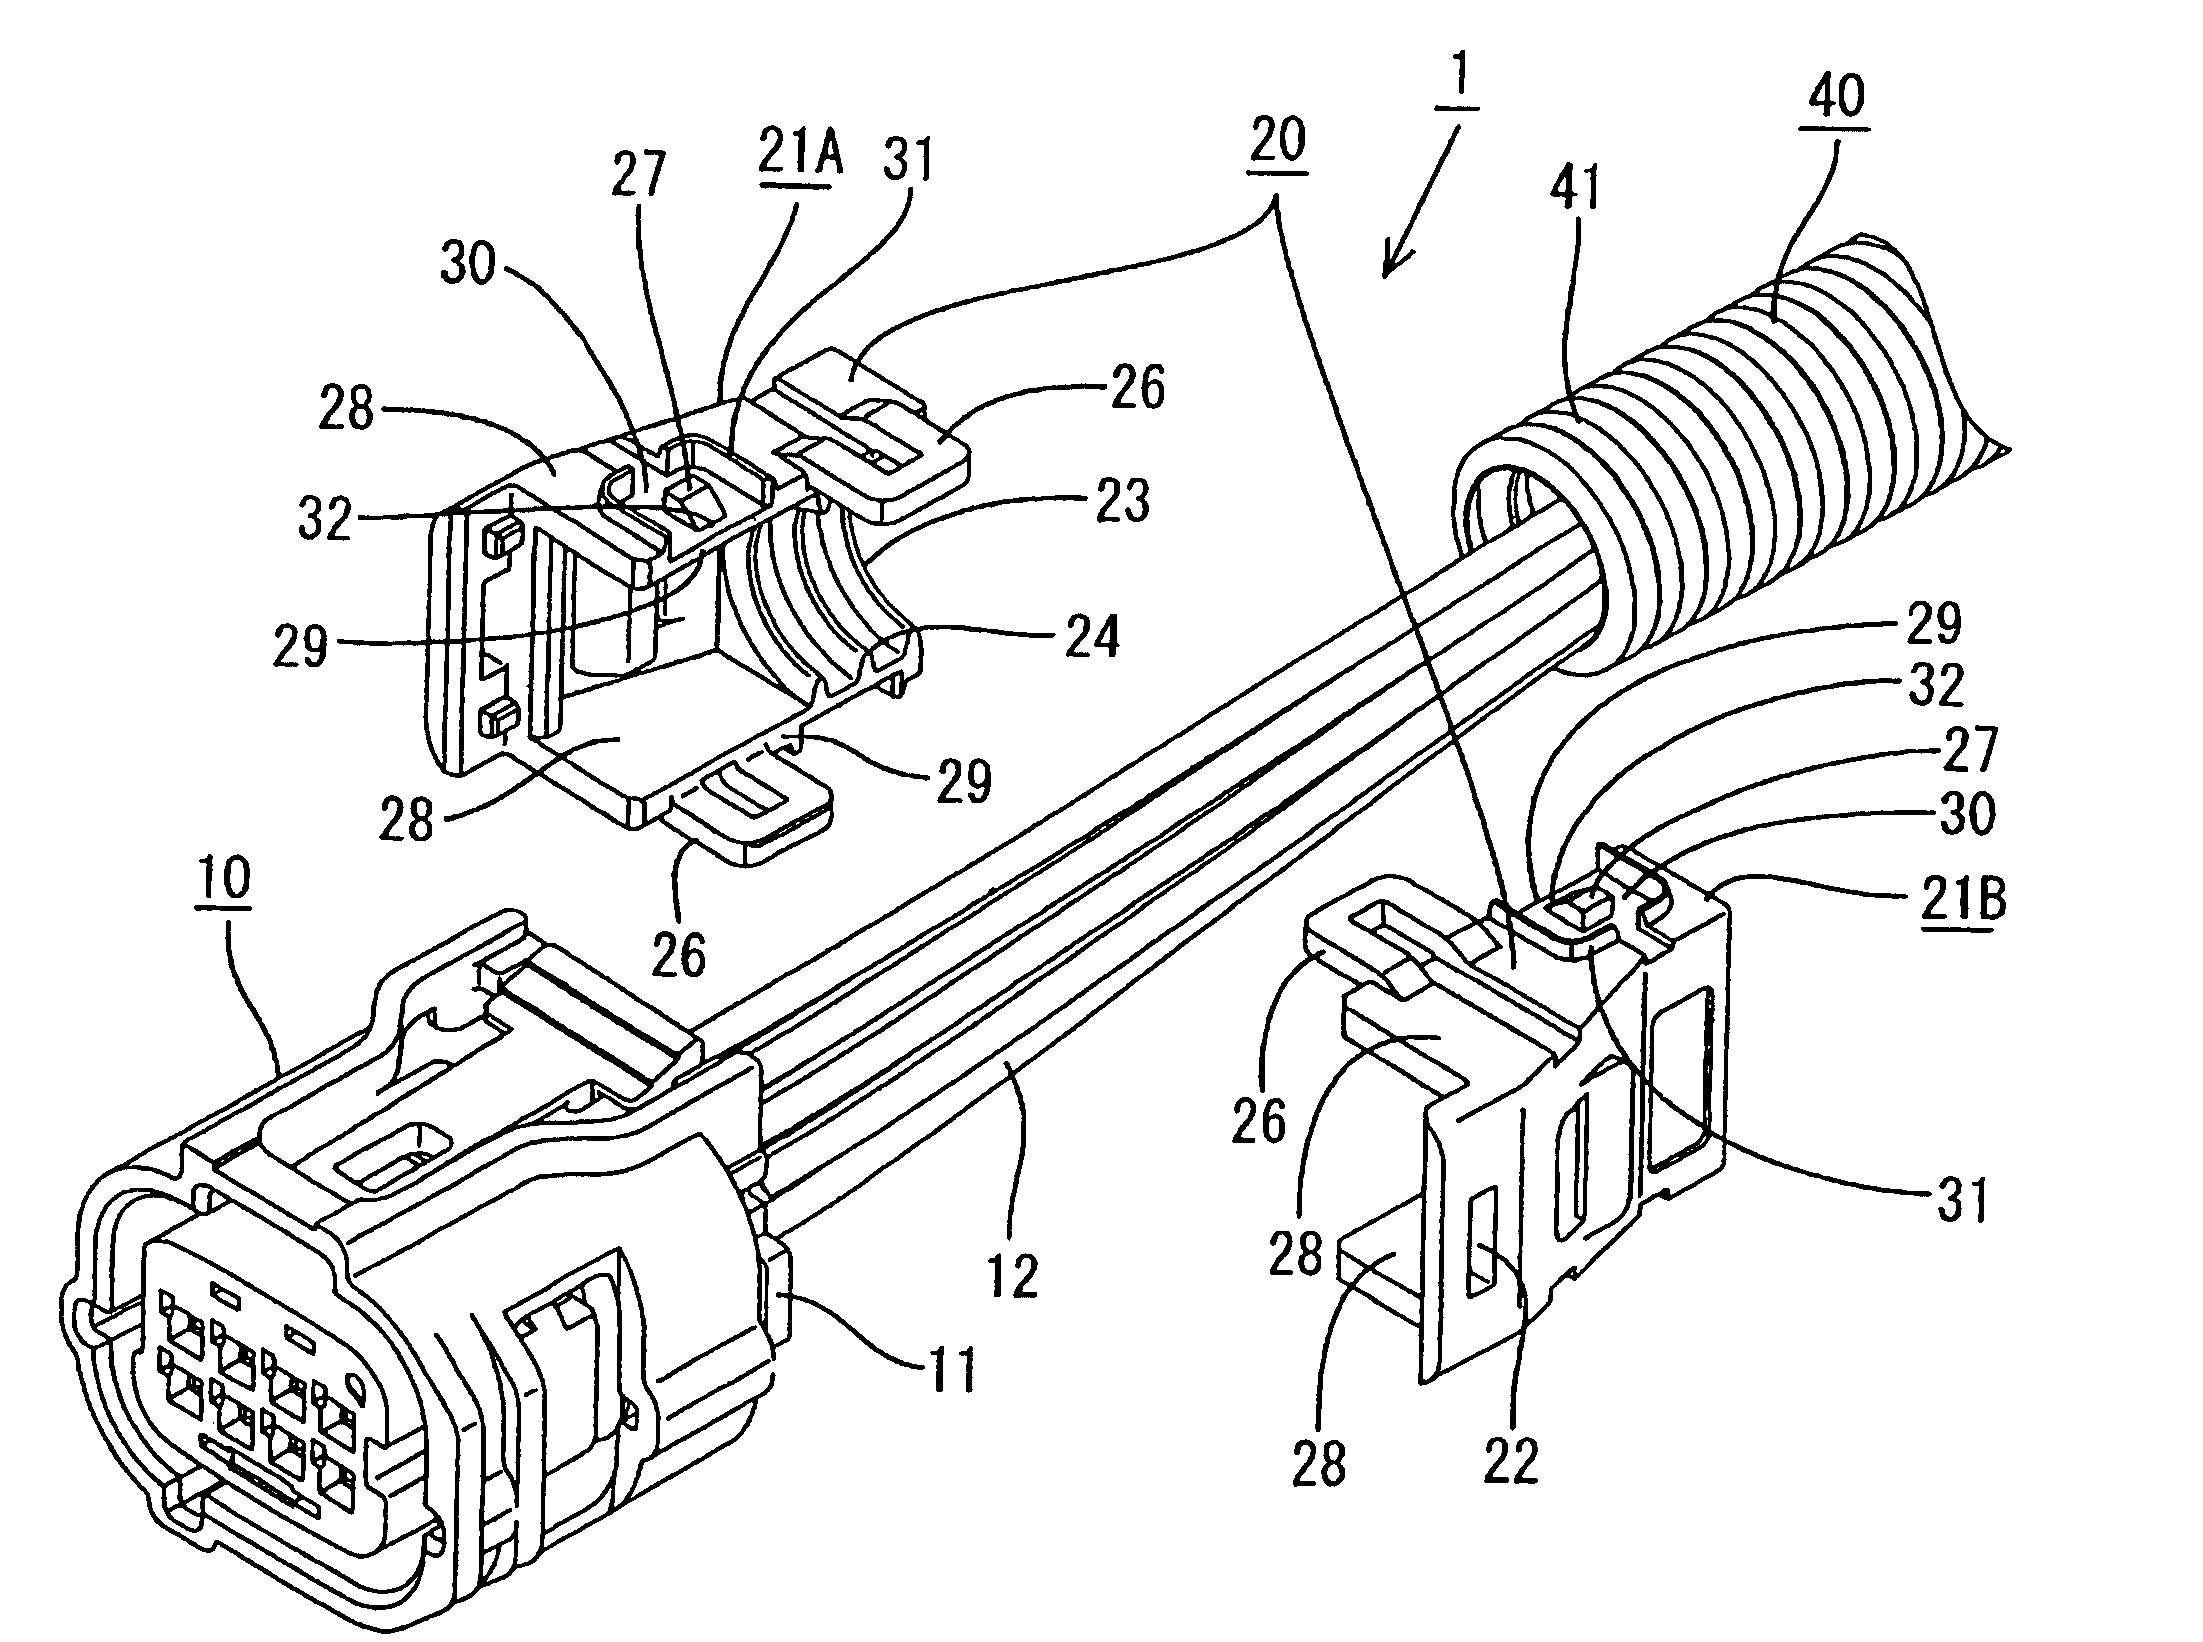 Wire cover with two longitudinal halves connectable around electric wires